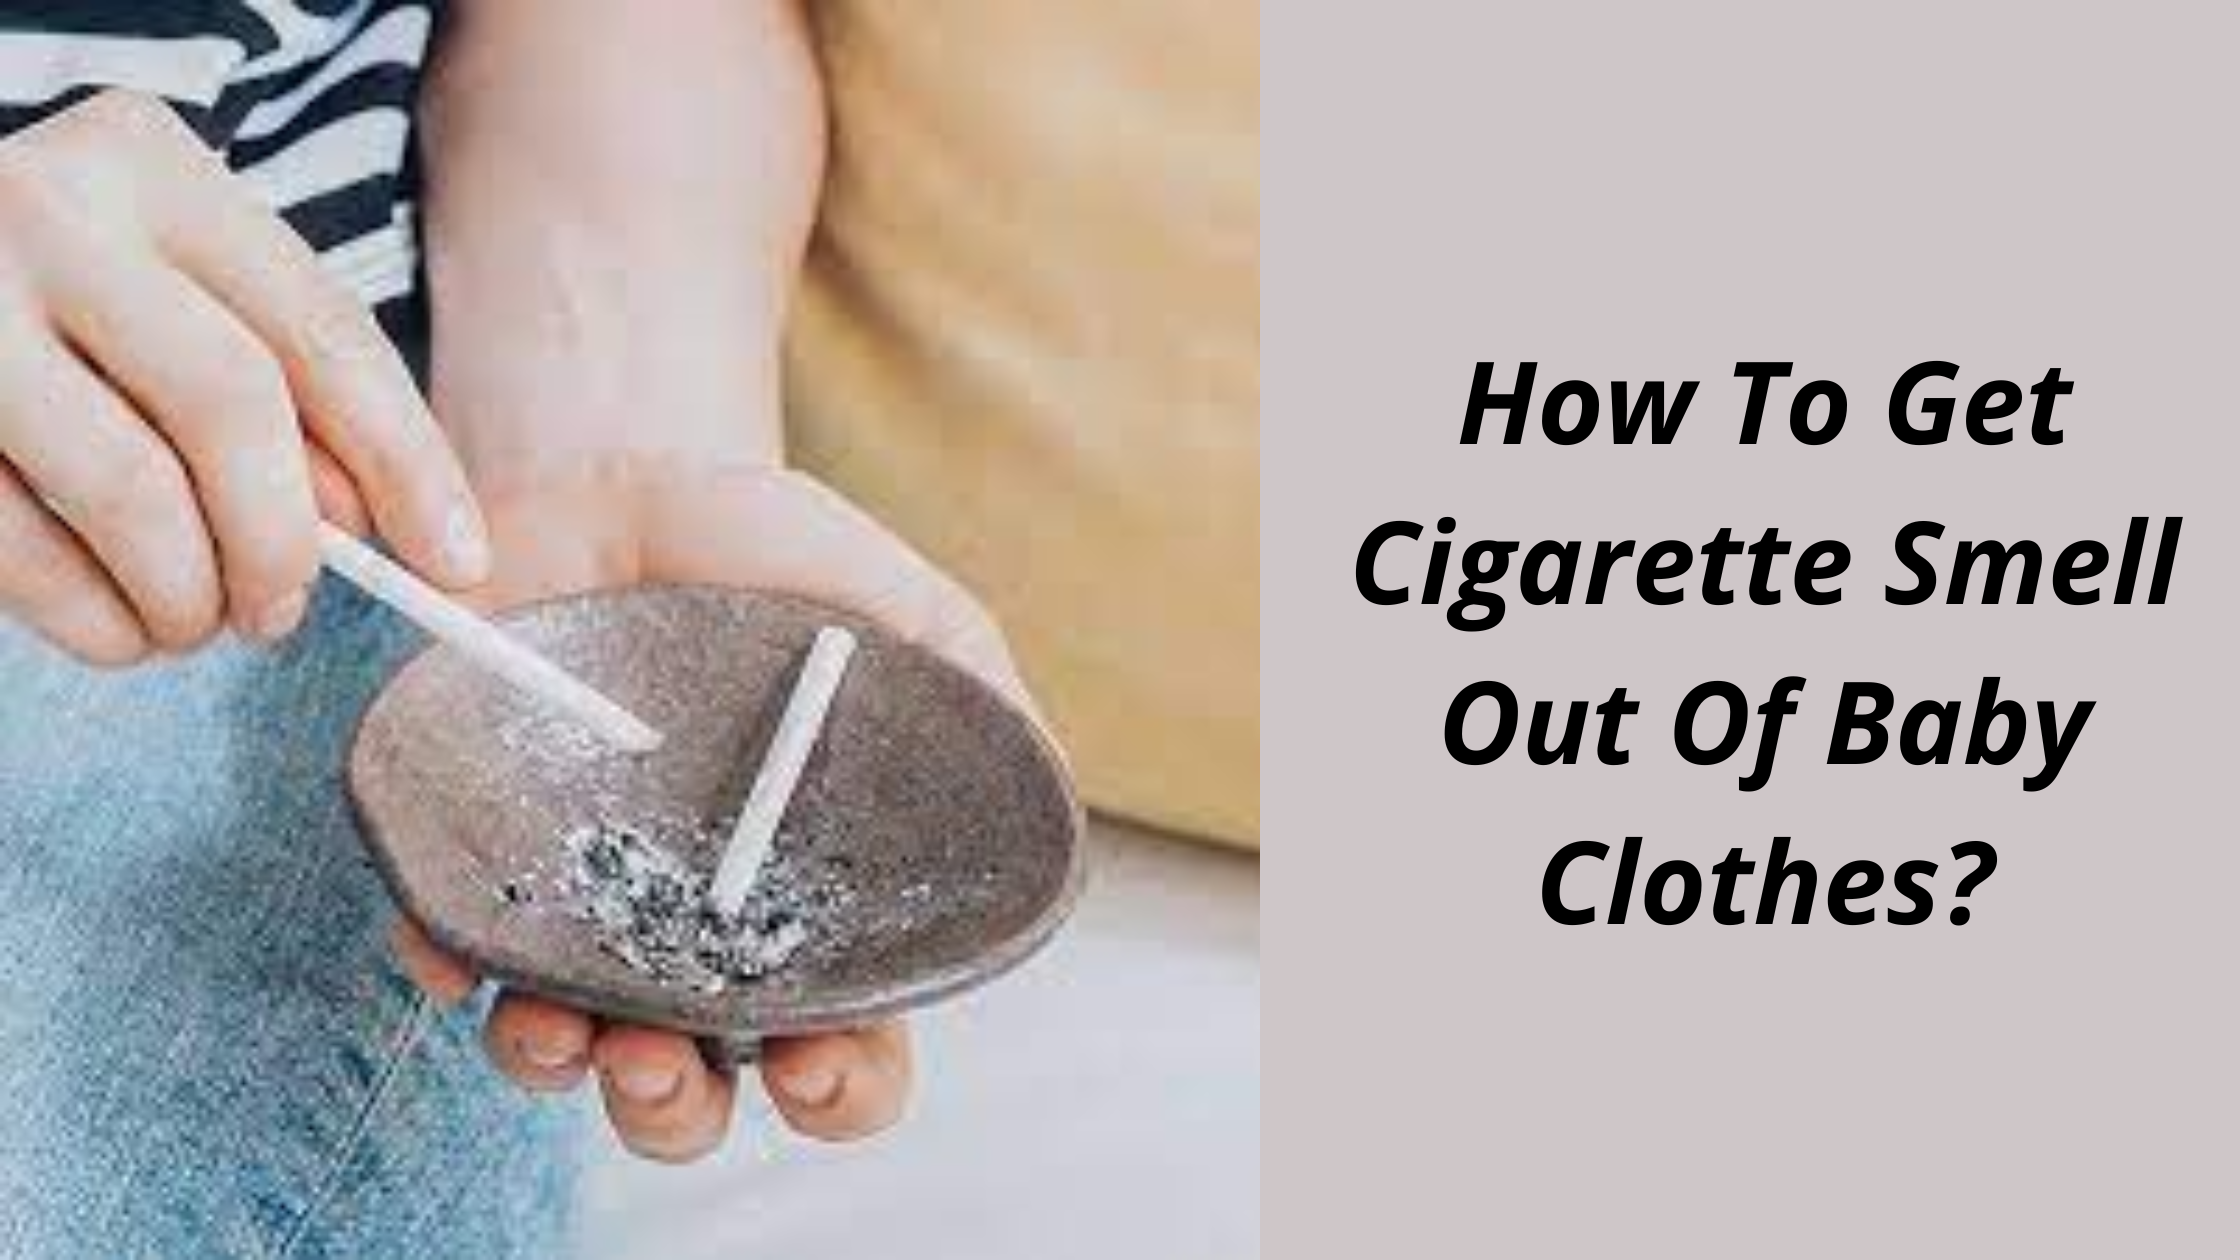 How to get cigarette smell out of clothes?